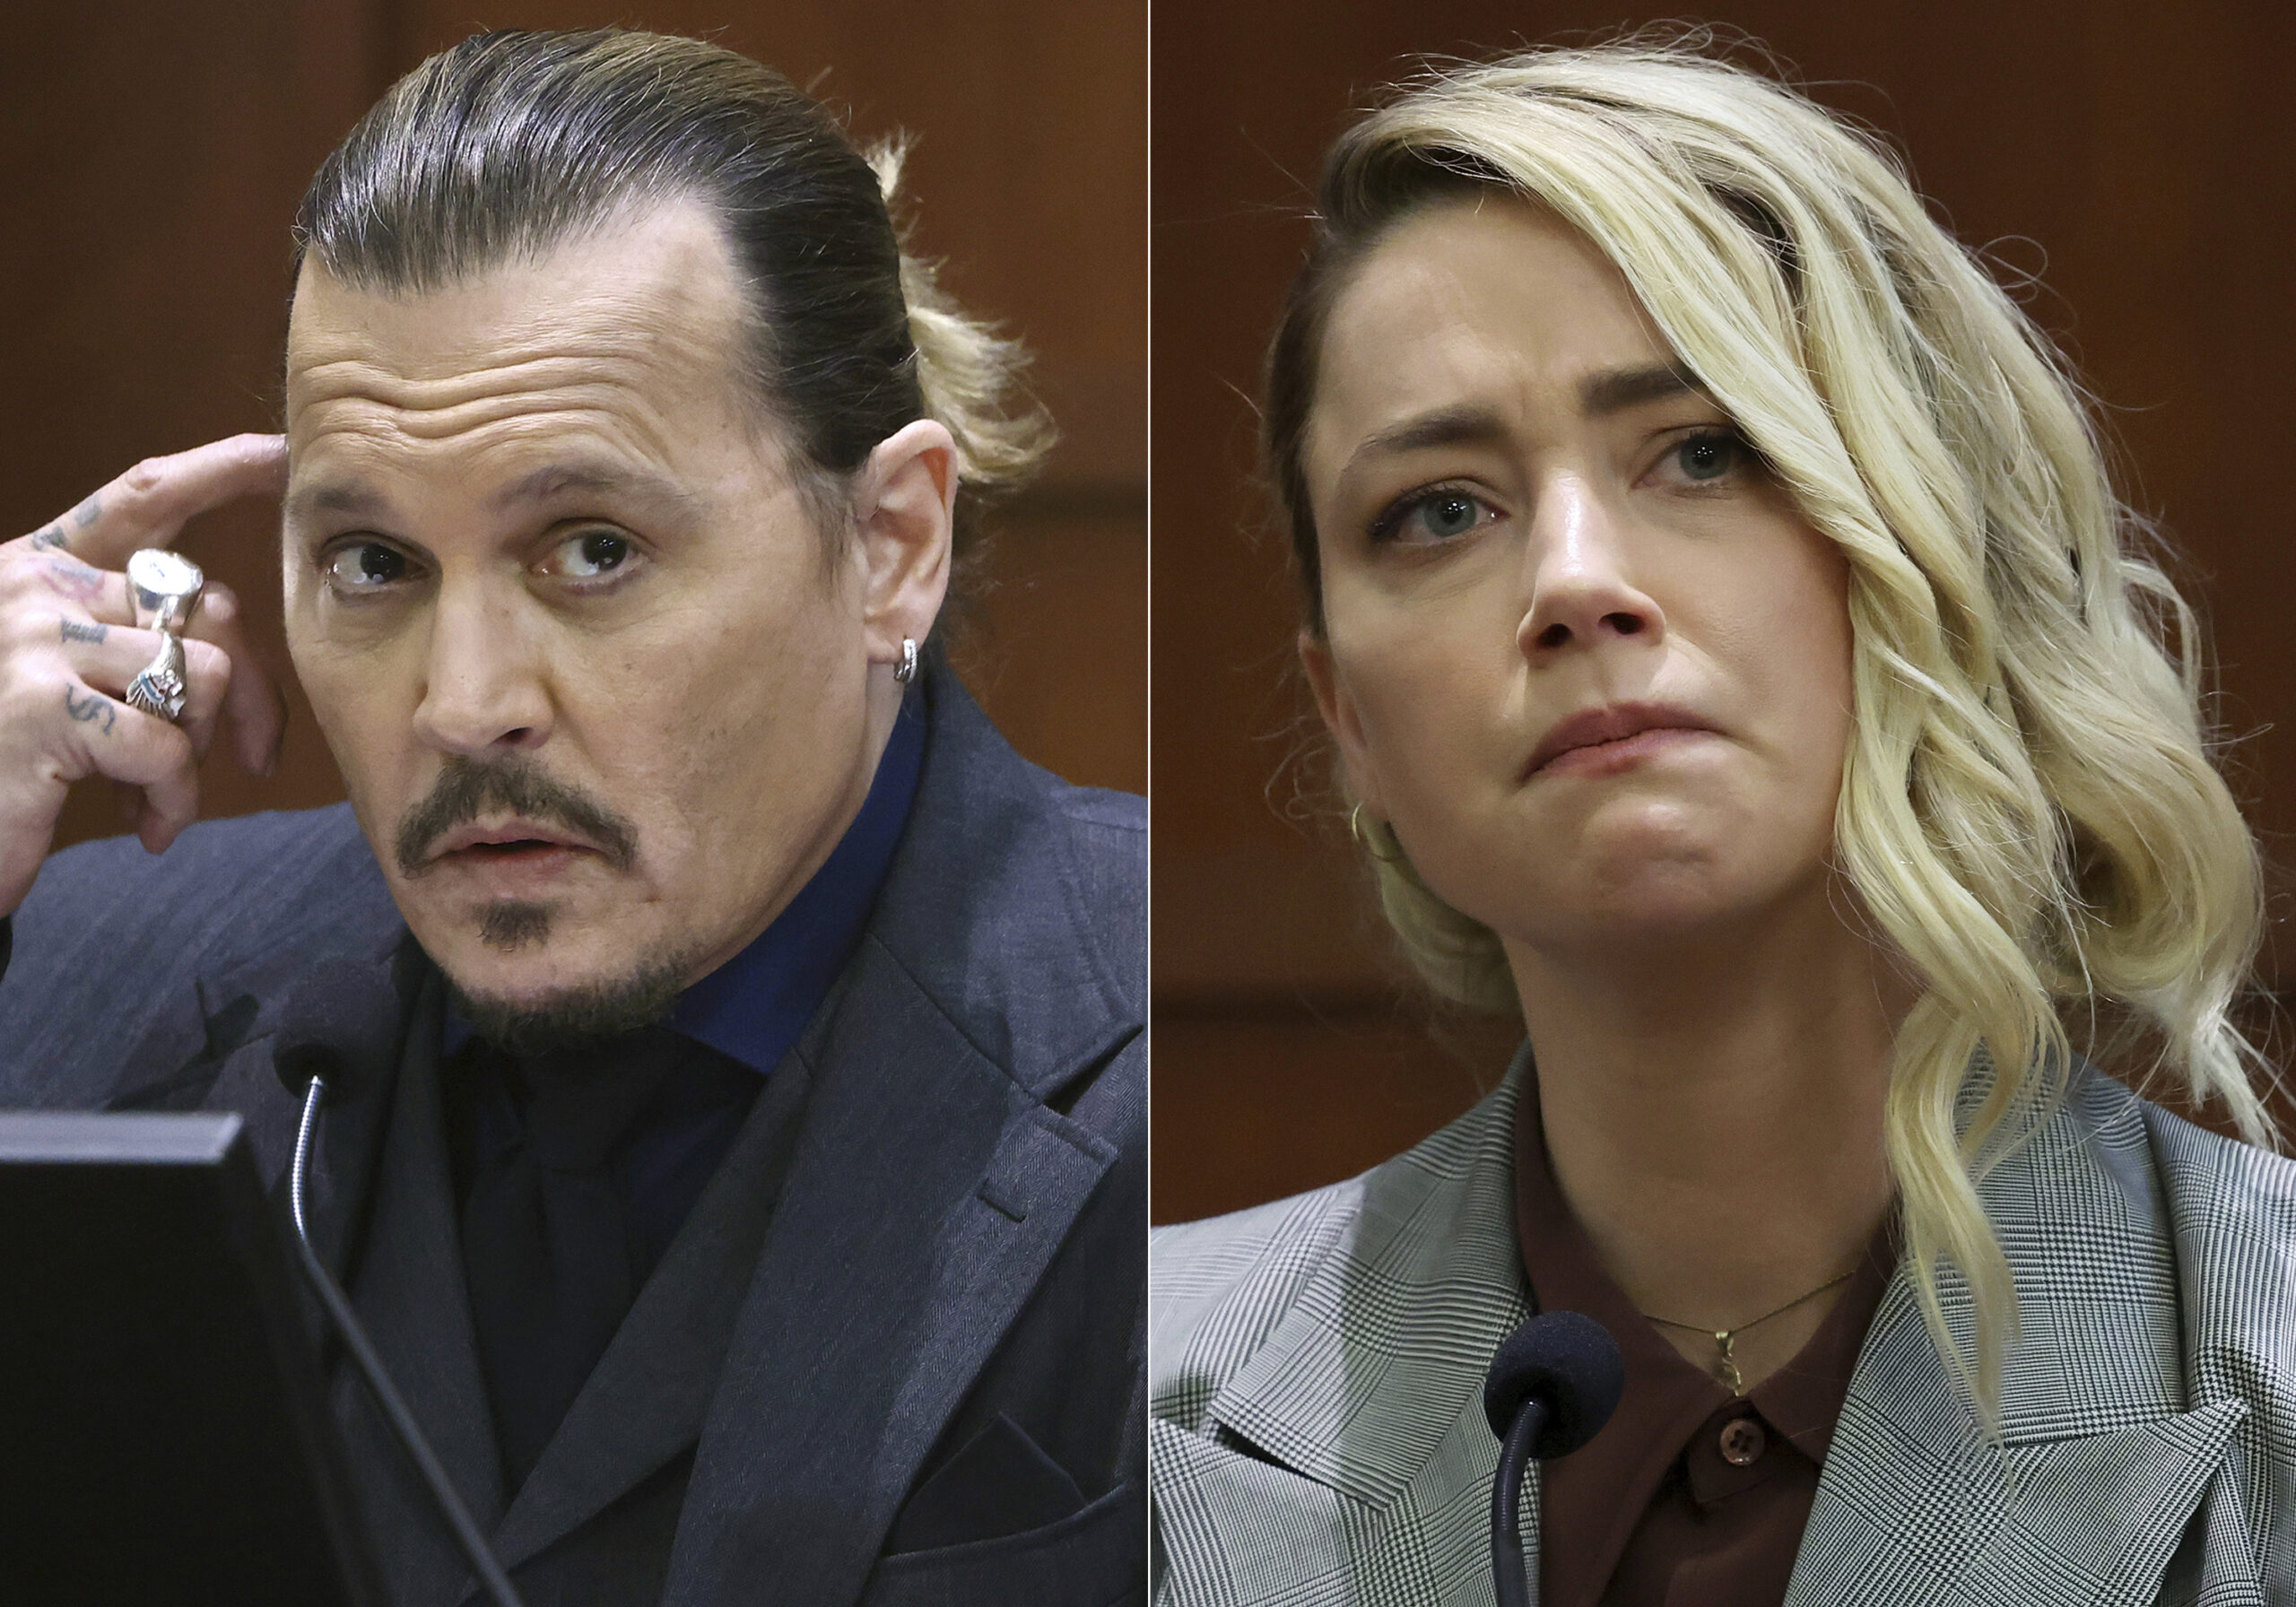 This combination of photos shows actor Johnny Depp testifying at the Fairfax County Circuit Court in Fairfax, Va., on April 21, 2022, left, and actor Amber Heard testifying in the same courtroom on May 26, 2022. Heard notified a Virginia court Thursday, July 21, that she will appeal the $10.35 million judgment she was ordered to pay Depp during a high-profile defamation trial that exposed the inner workings of their troubled marriage. (AP Photo)